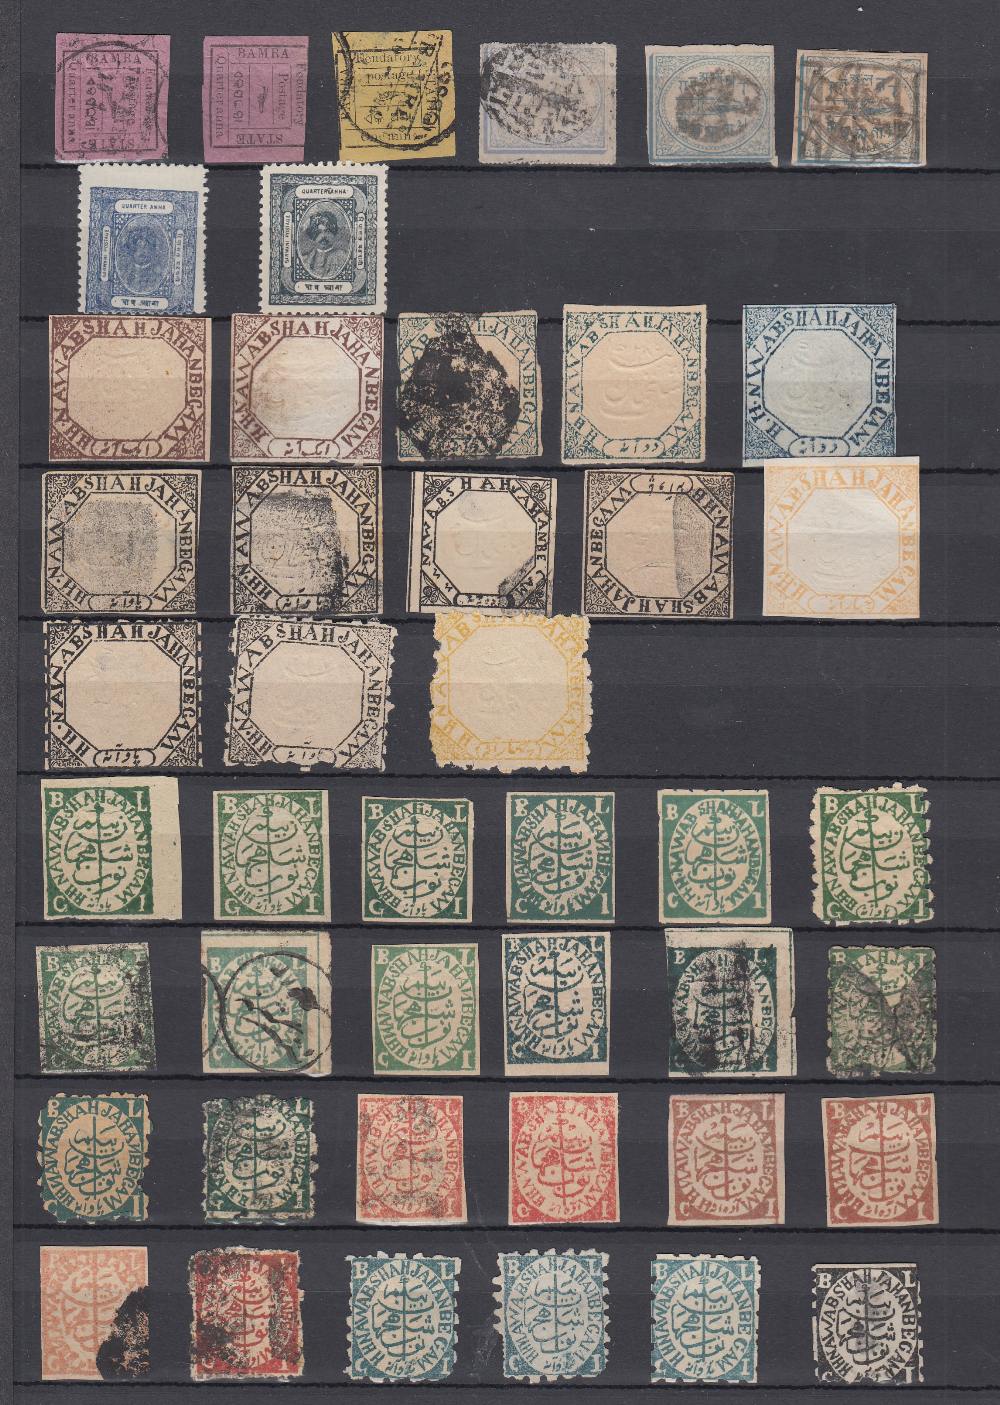 STAMPS BRITISH COMMONWEALTH mint and used in burgandy stockbook, Malaya, India all pre QEII. - Image 4 of 6